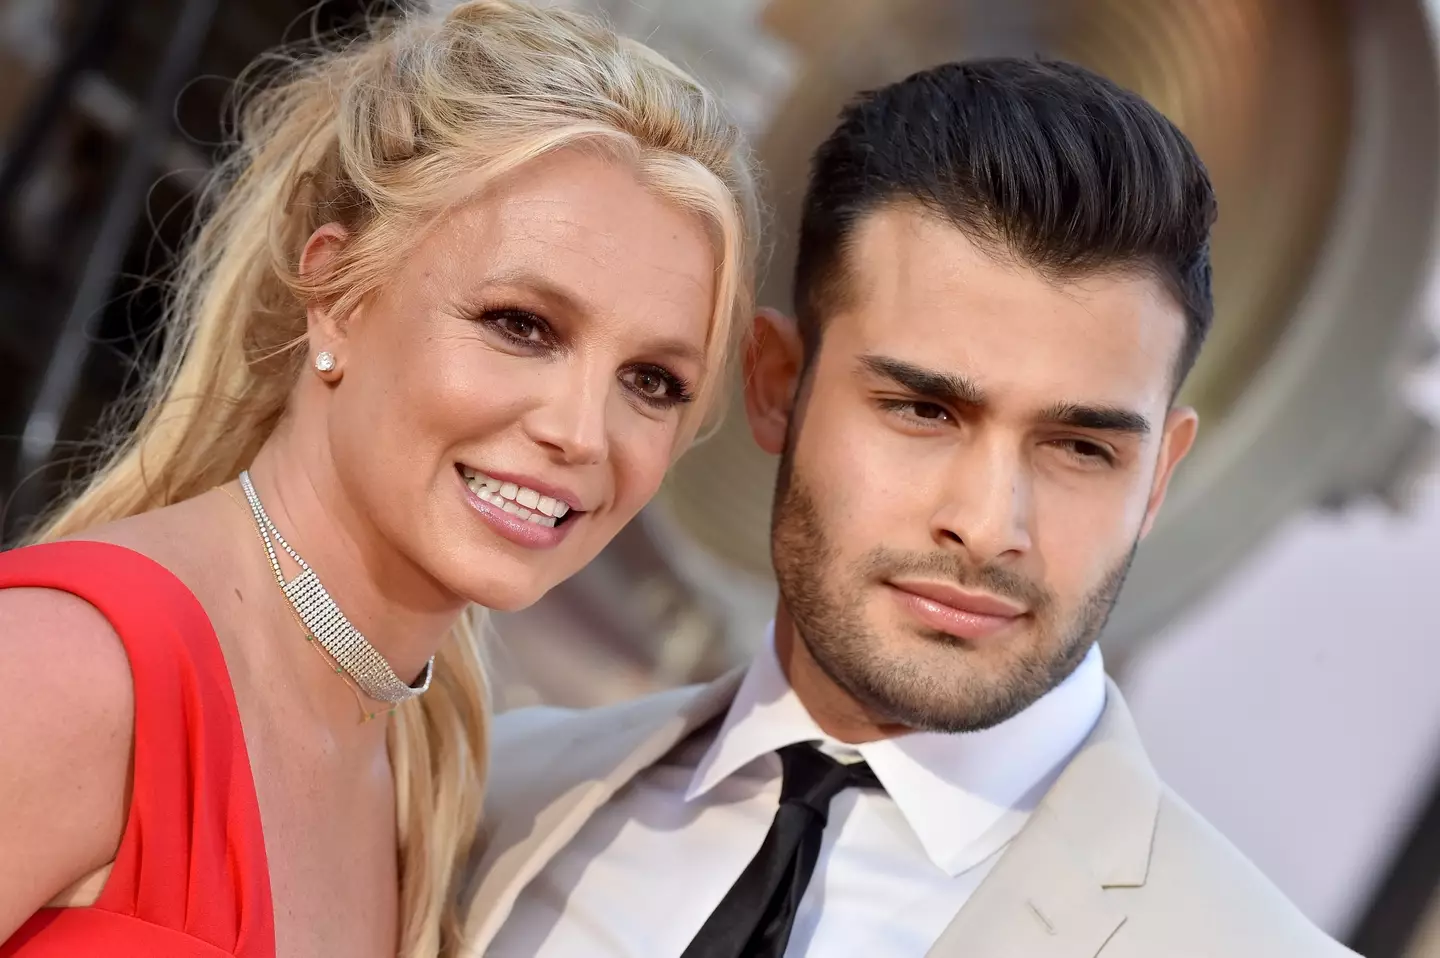 Sam and Britney split back in August last year.